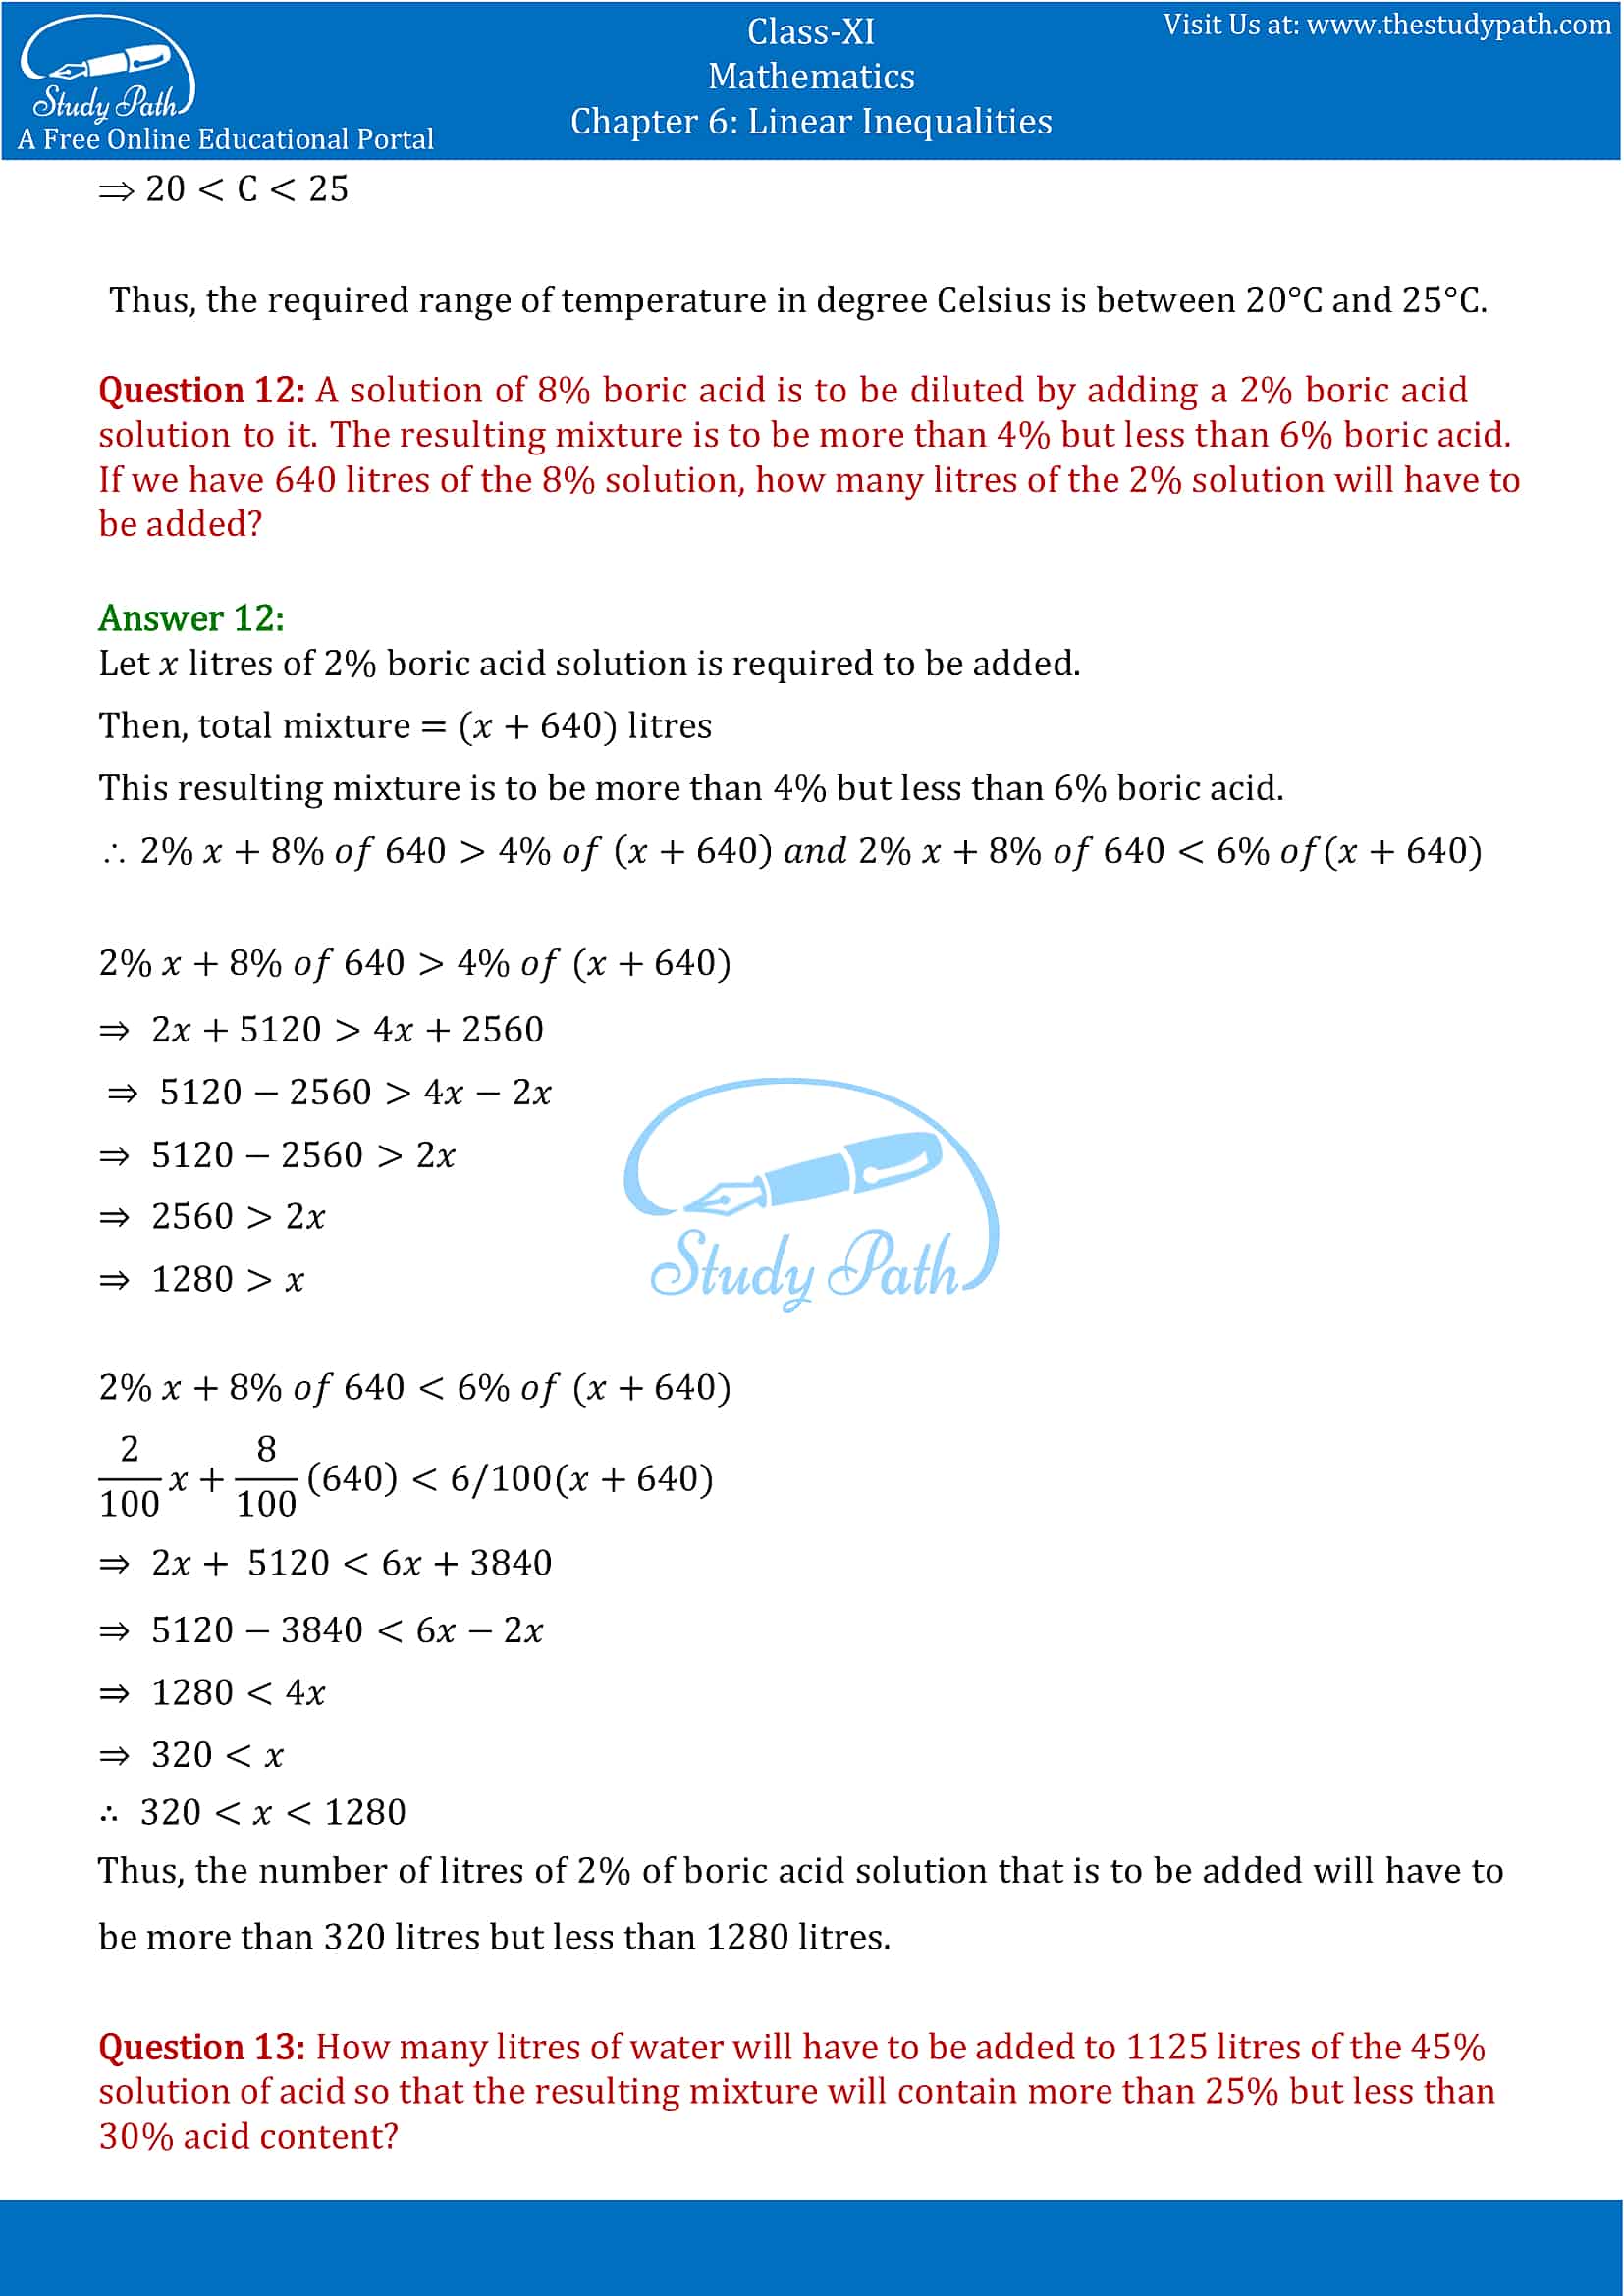 NCERT Solutions for Class 11 Maths chapter 6 Linear Inequalities Miscellaneous Exercise Part-5